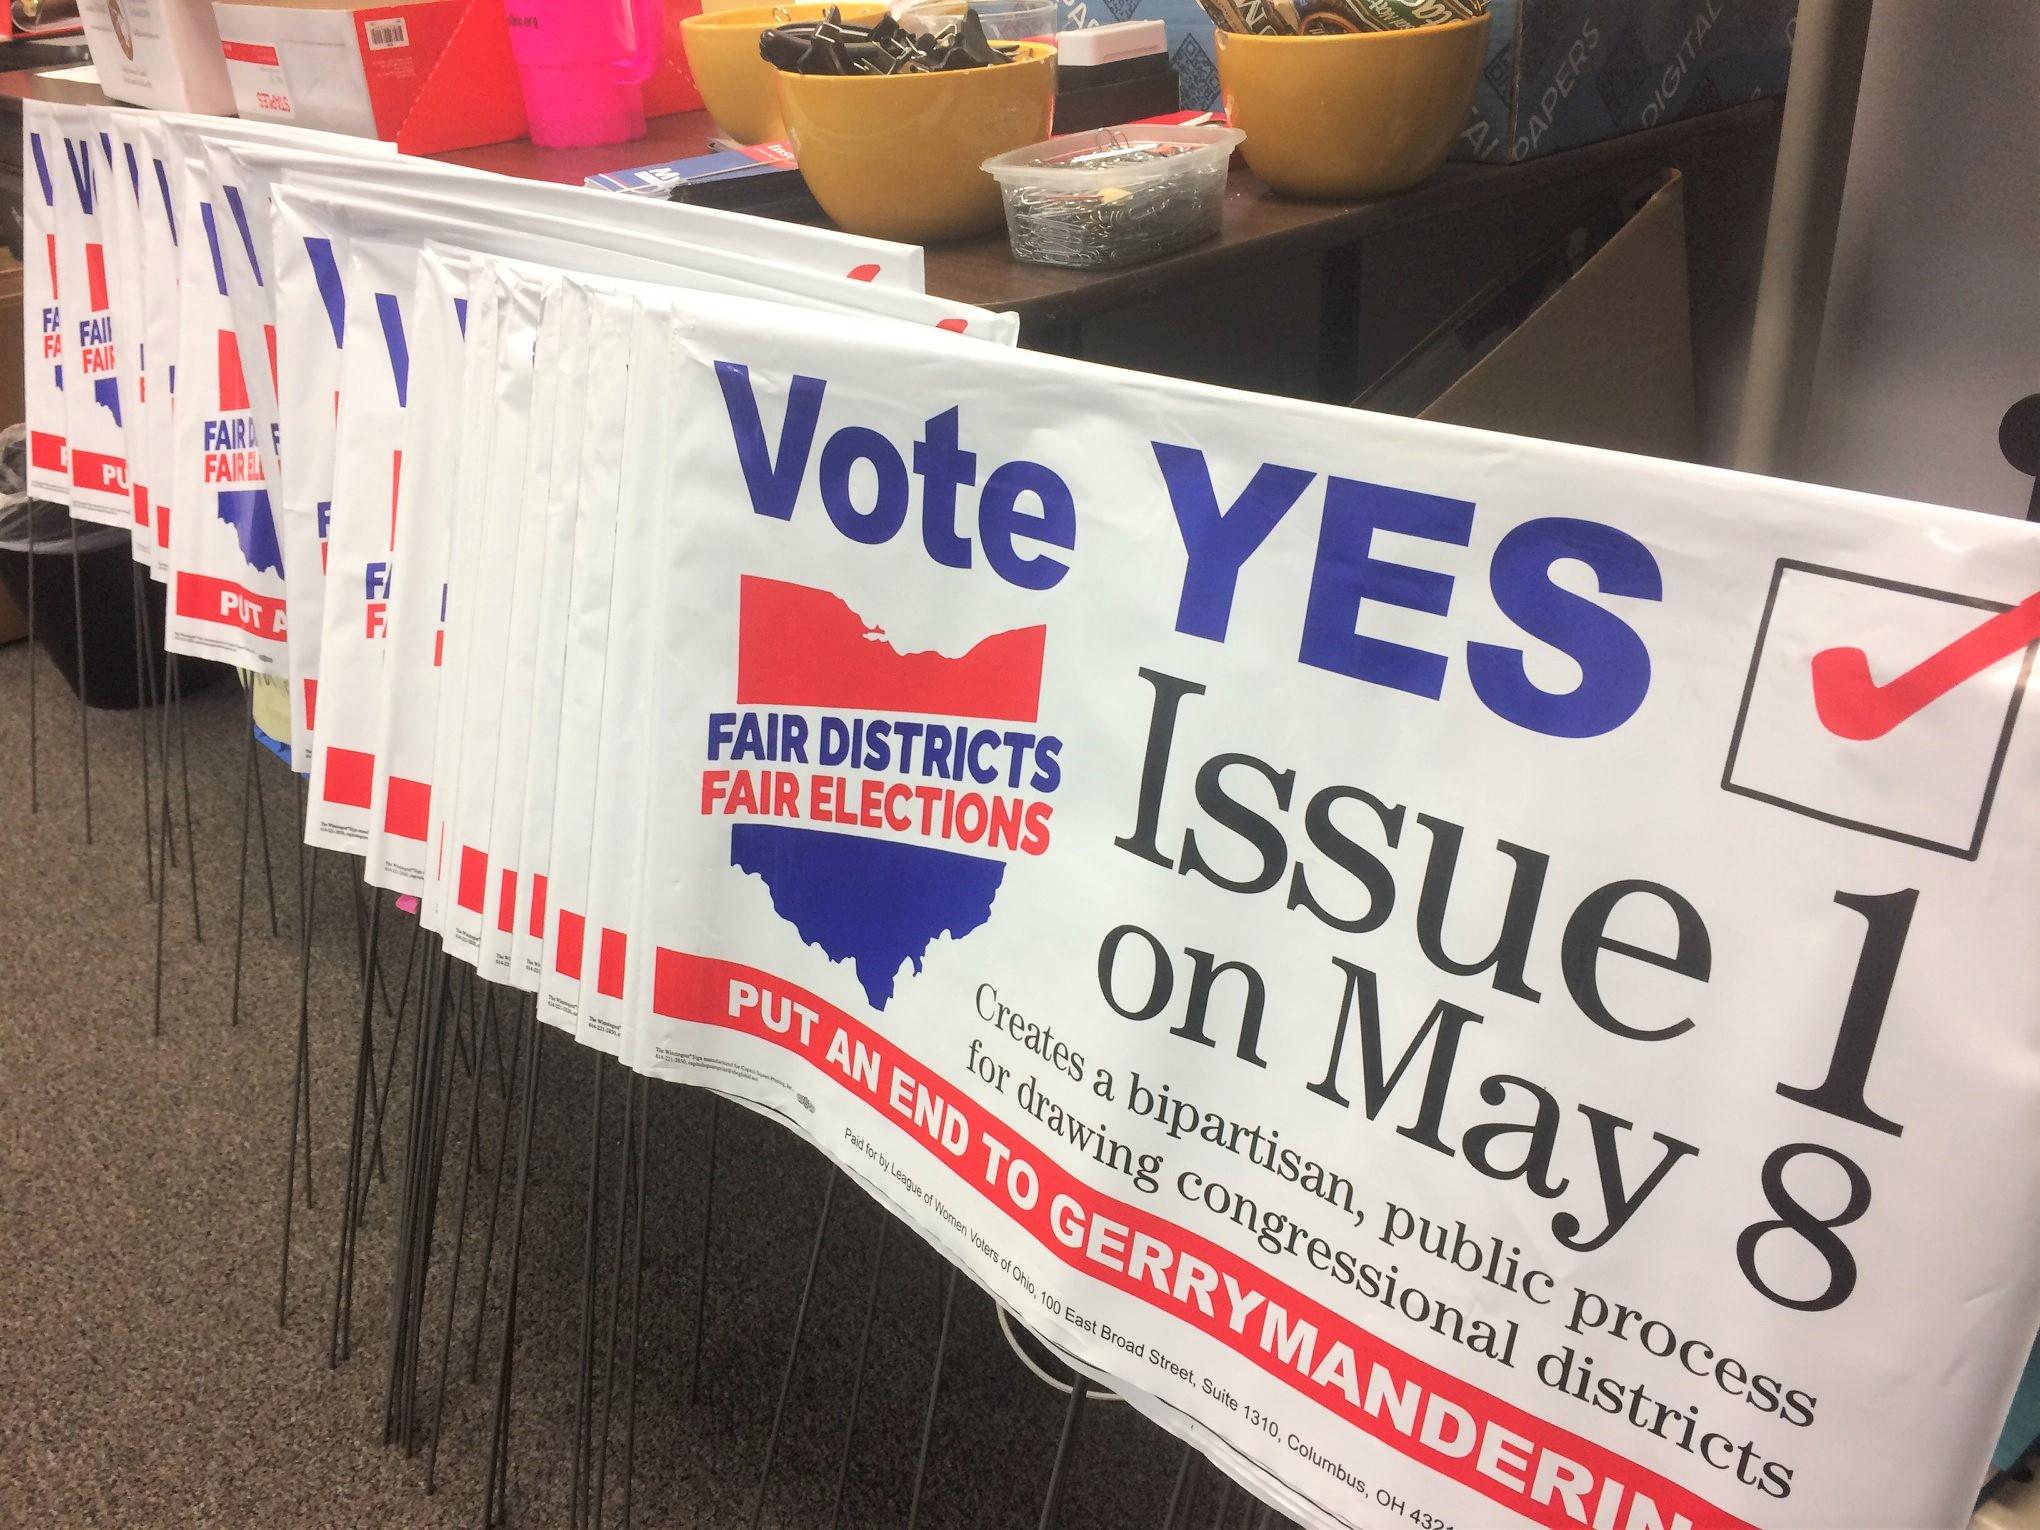 What You Need To Know About Issue 1, Ohio's Redistricting Proposal